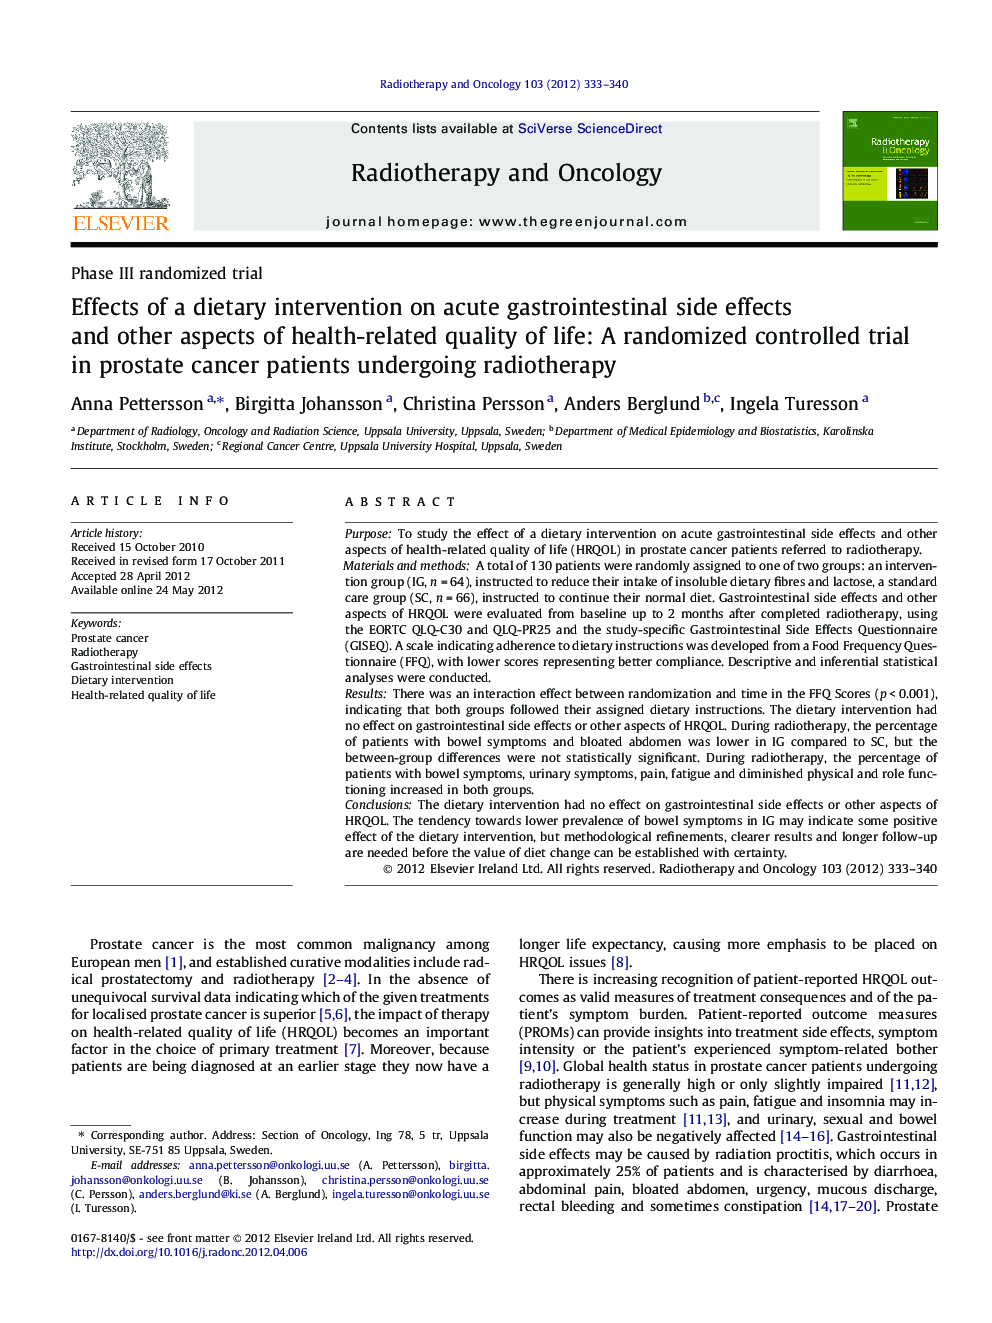 Effects of a dietary intervention on acute gastrointestinal side effects and other aspects of health-related quality of life: A randomized controlled trial in prostate cancer patients undergoing radiotherapy